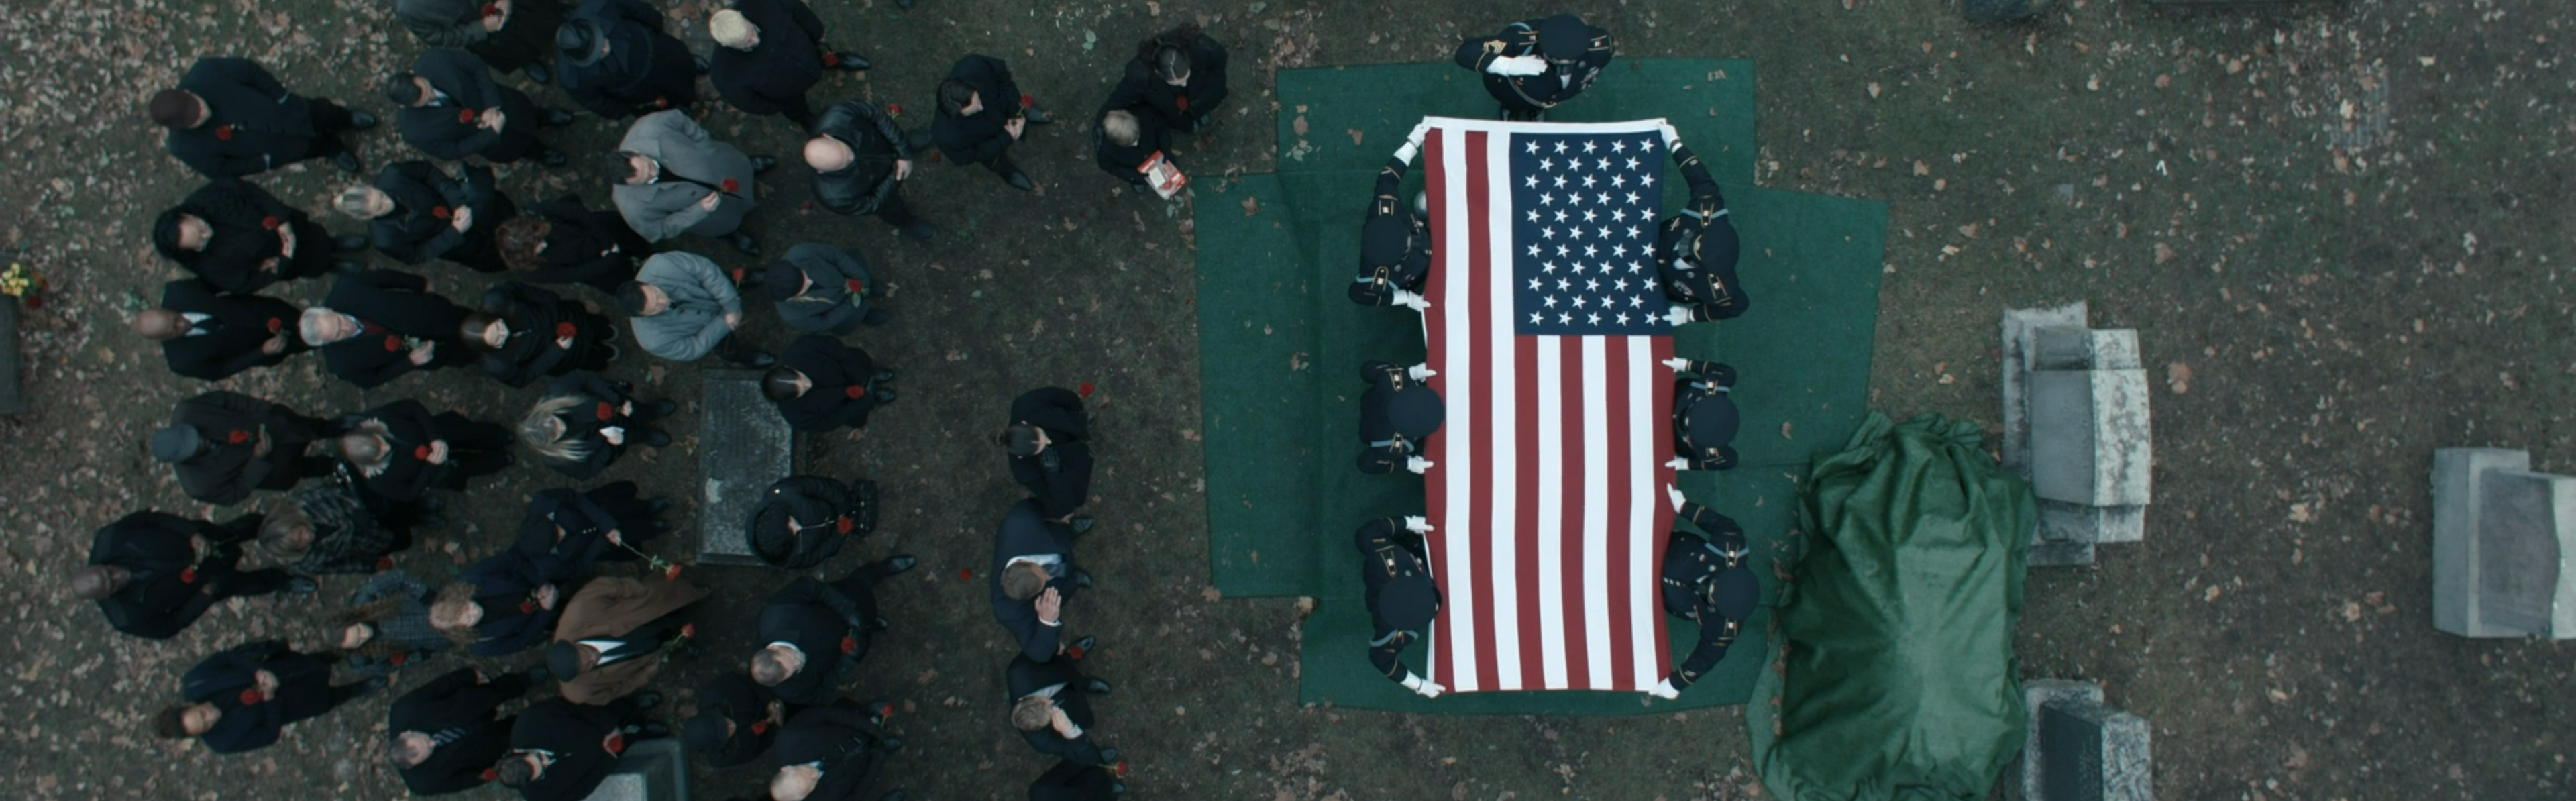 The American flag over a coffin.